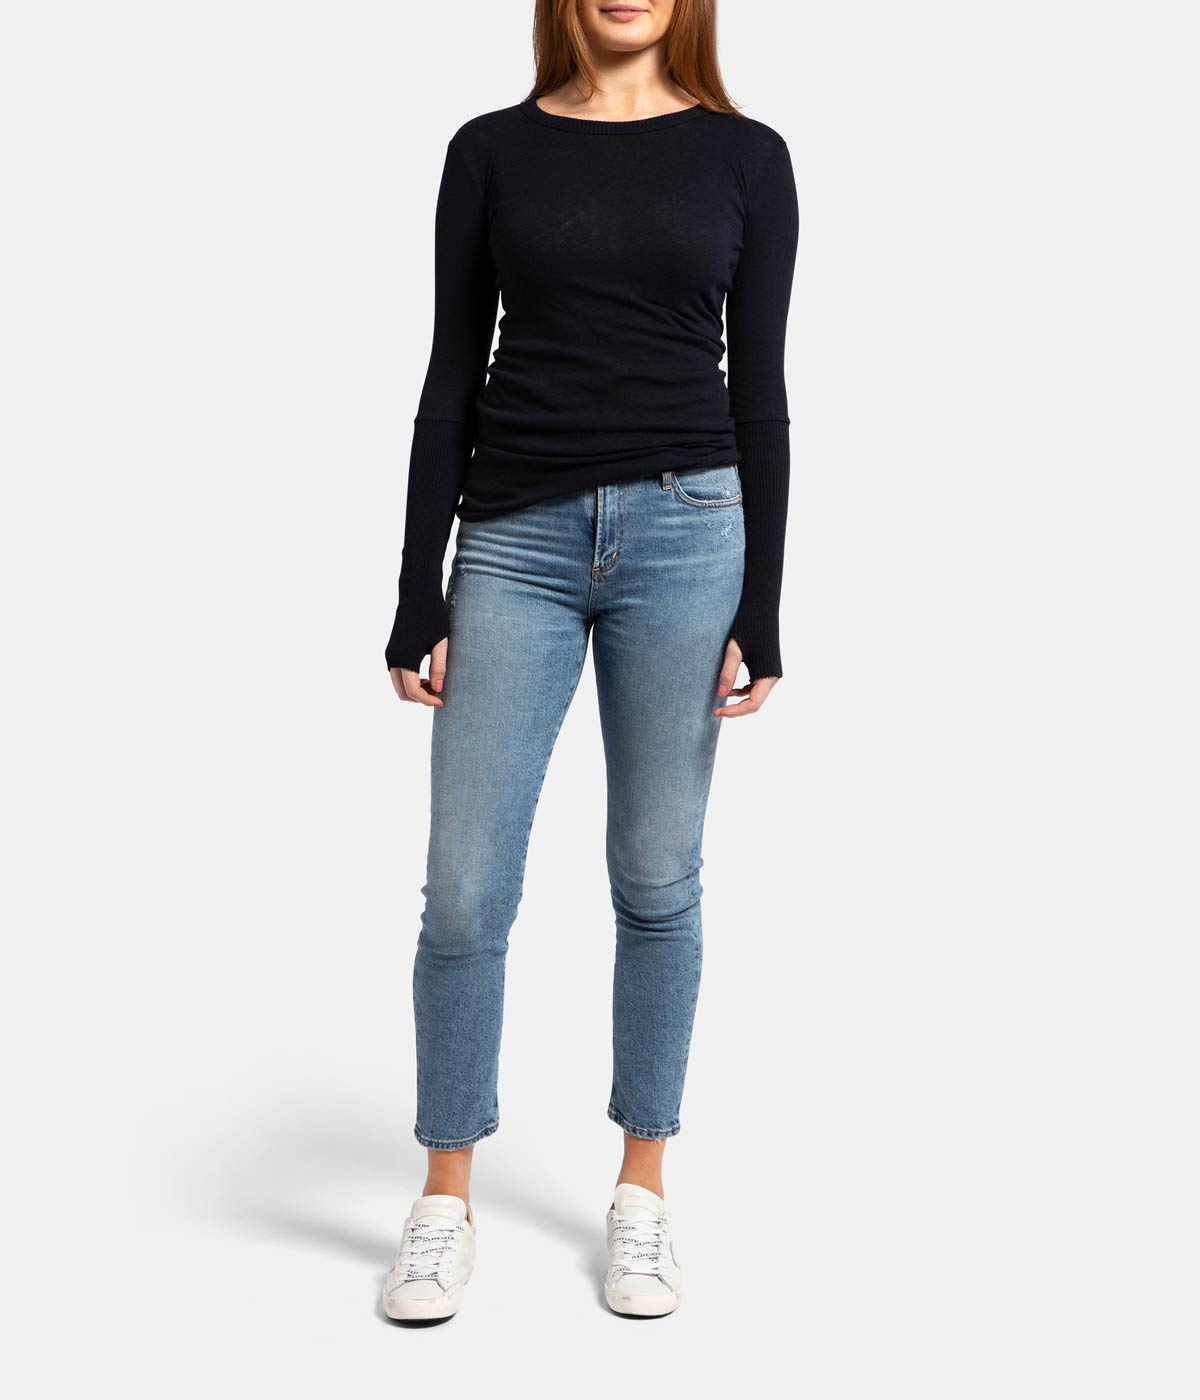 Cashmere Crew Neck Fitted Long Sleeve Top in Navy